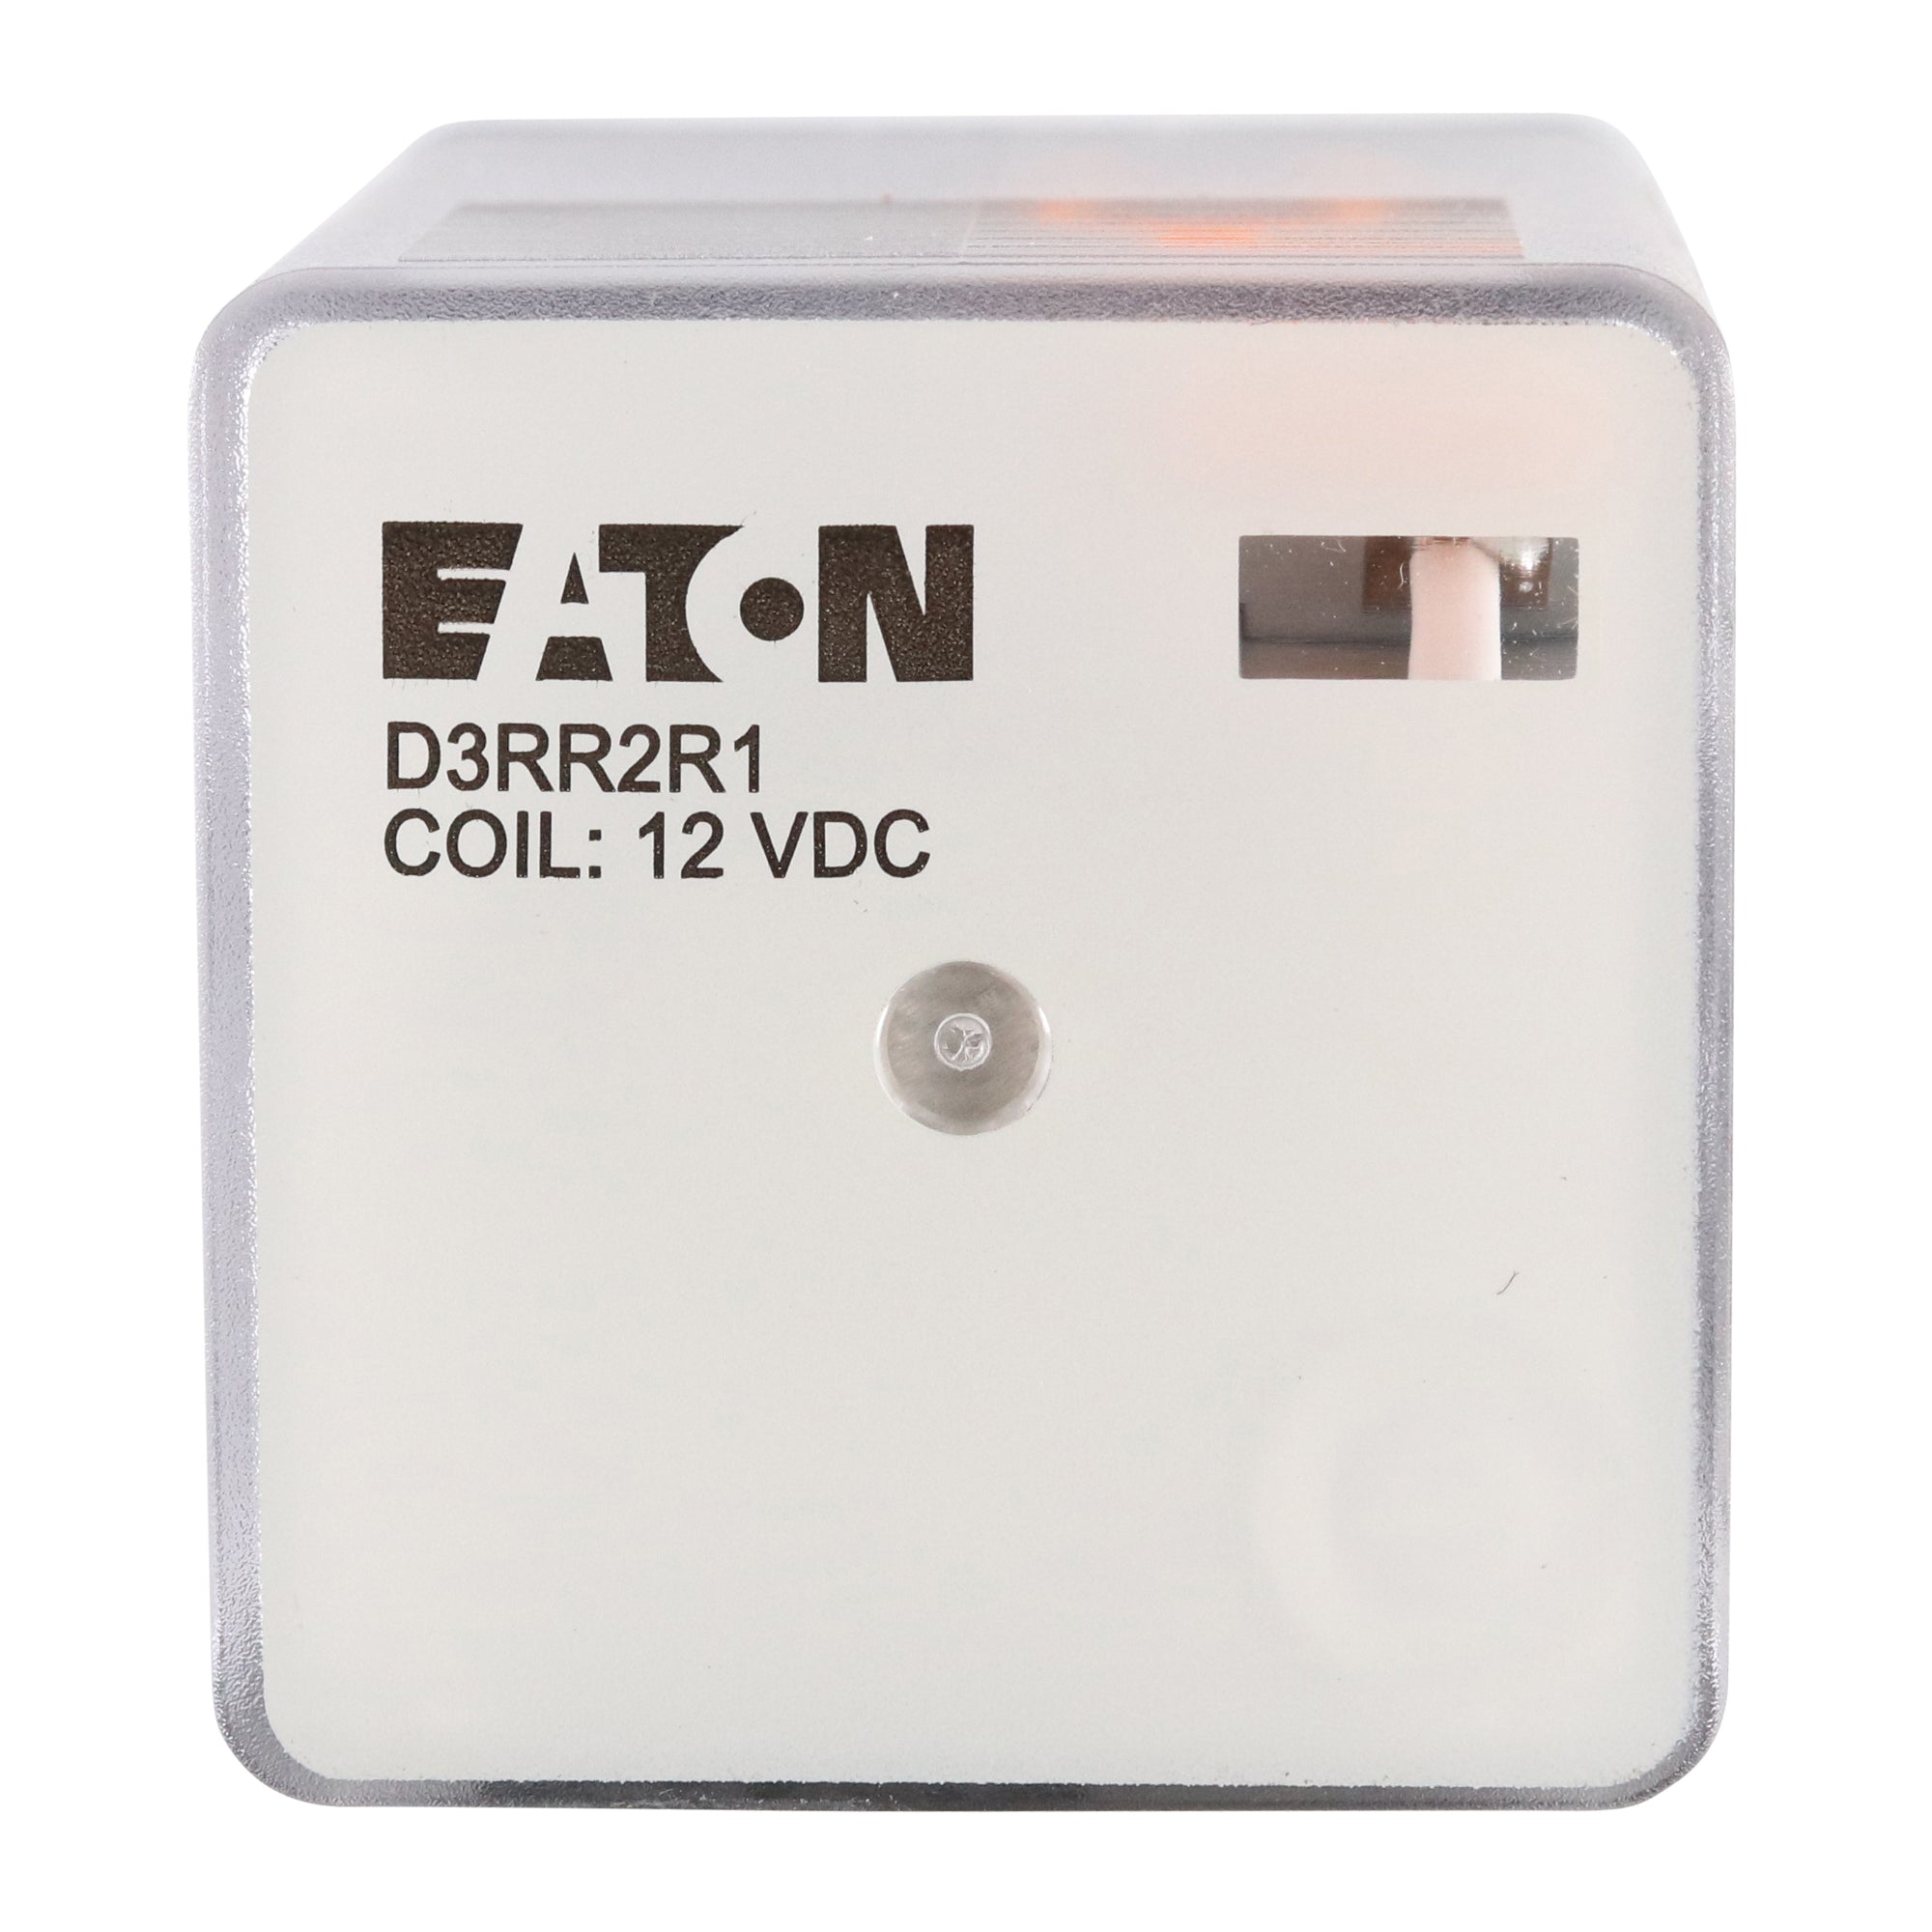 EATON, EATON D3RR2R1 GENERAL PURPOSE ICE CUBE RELAY, 8 PIN, DPDT, 10A, 24VDC COIL